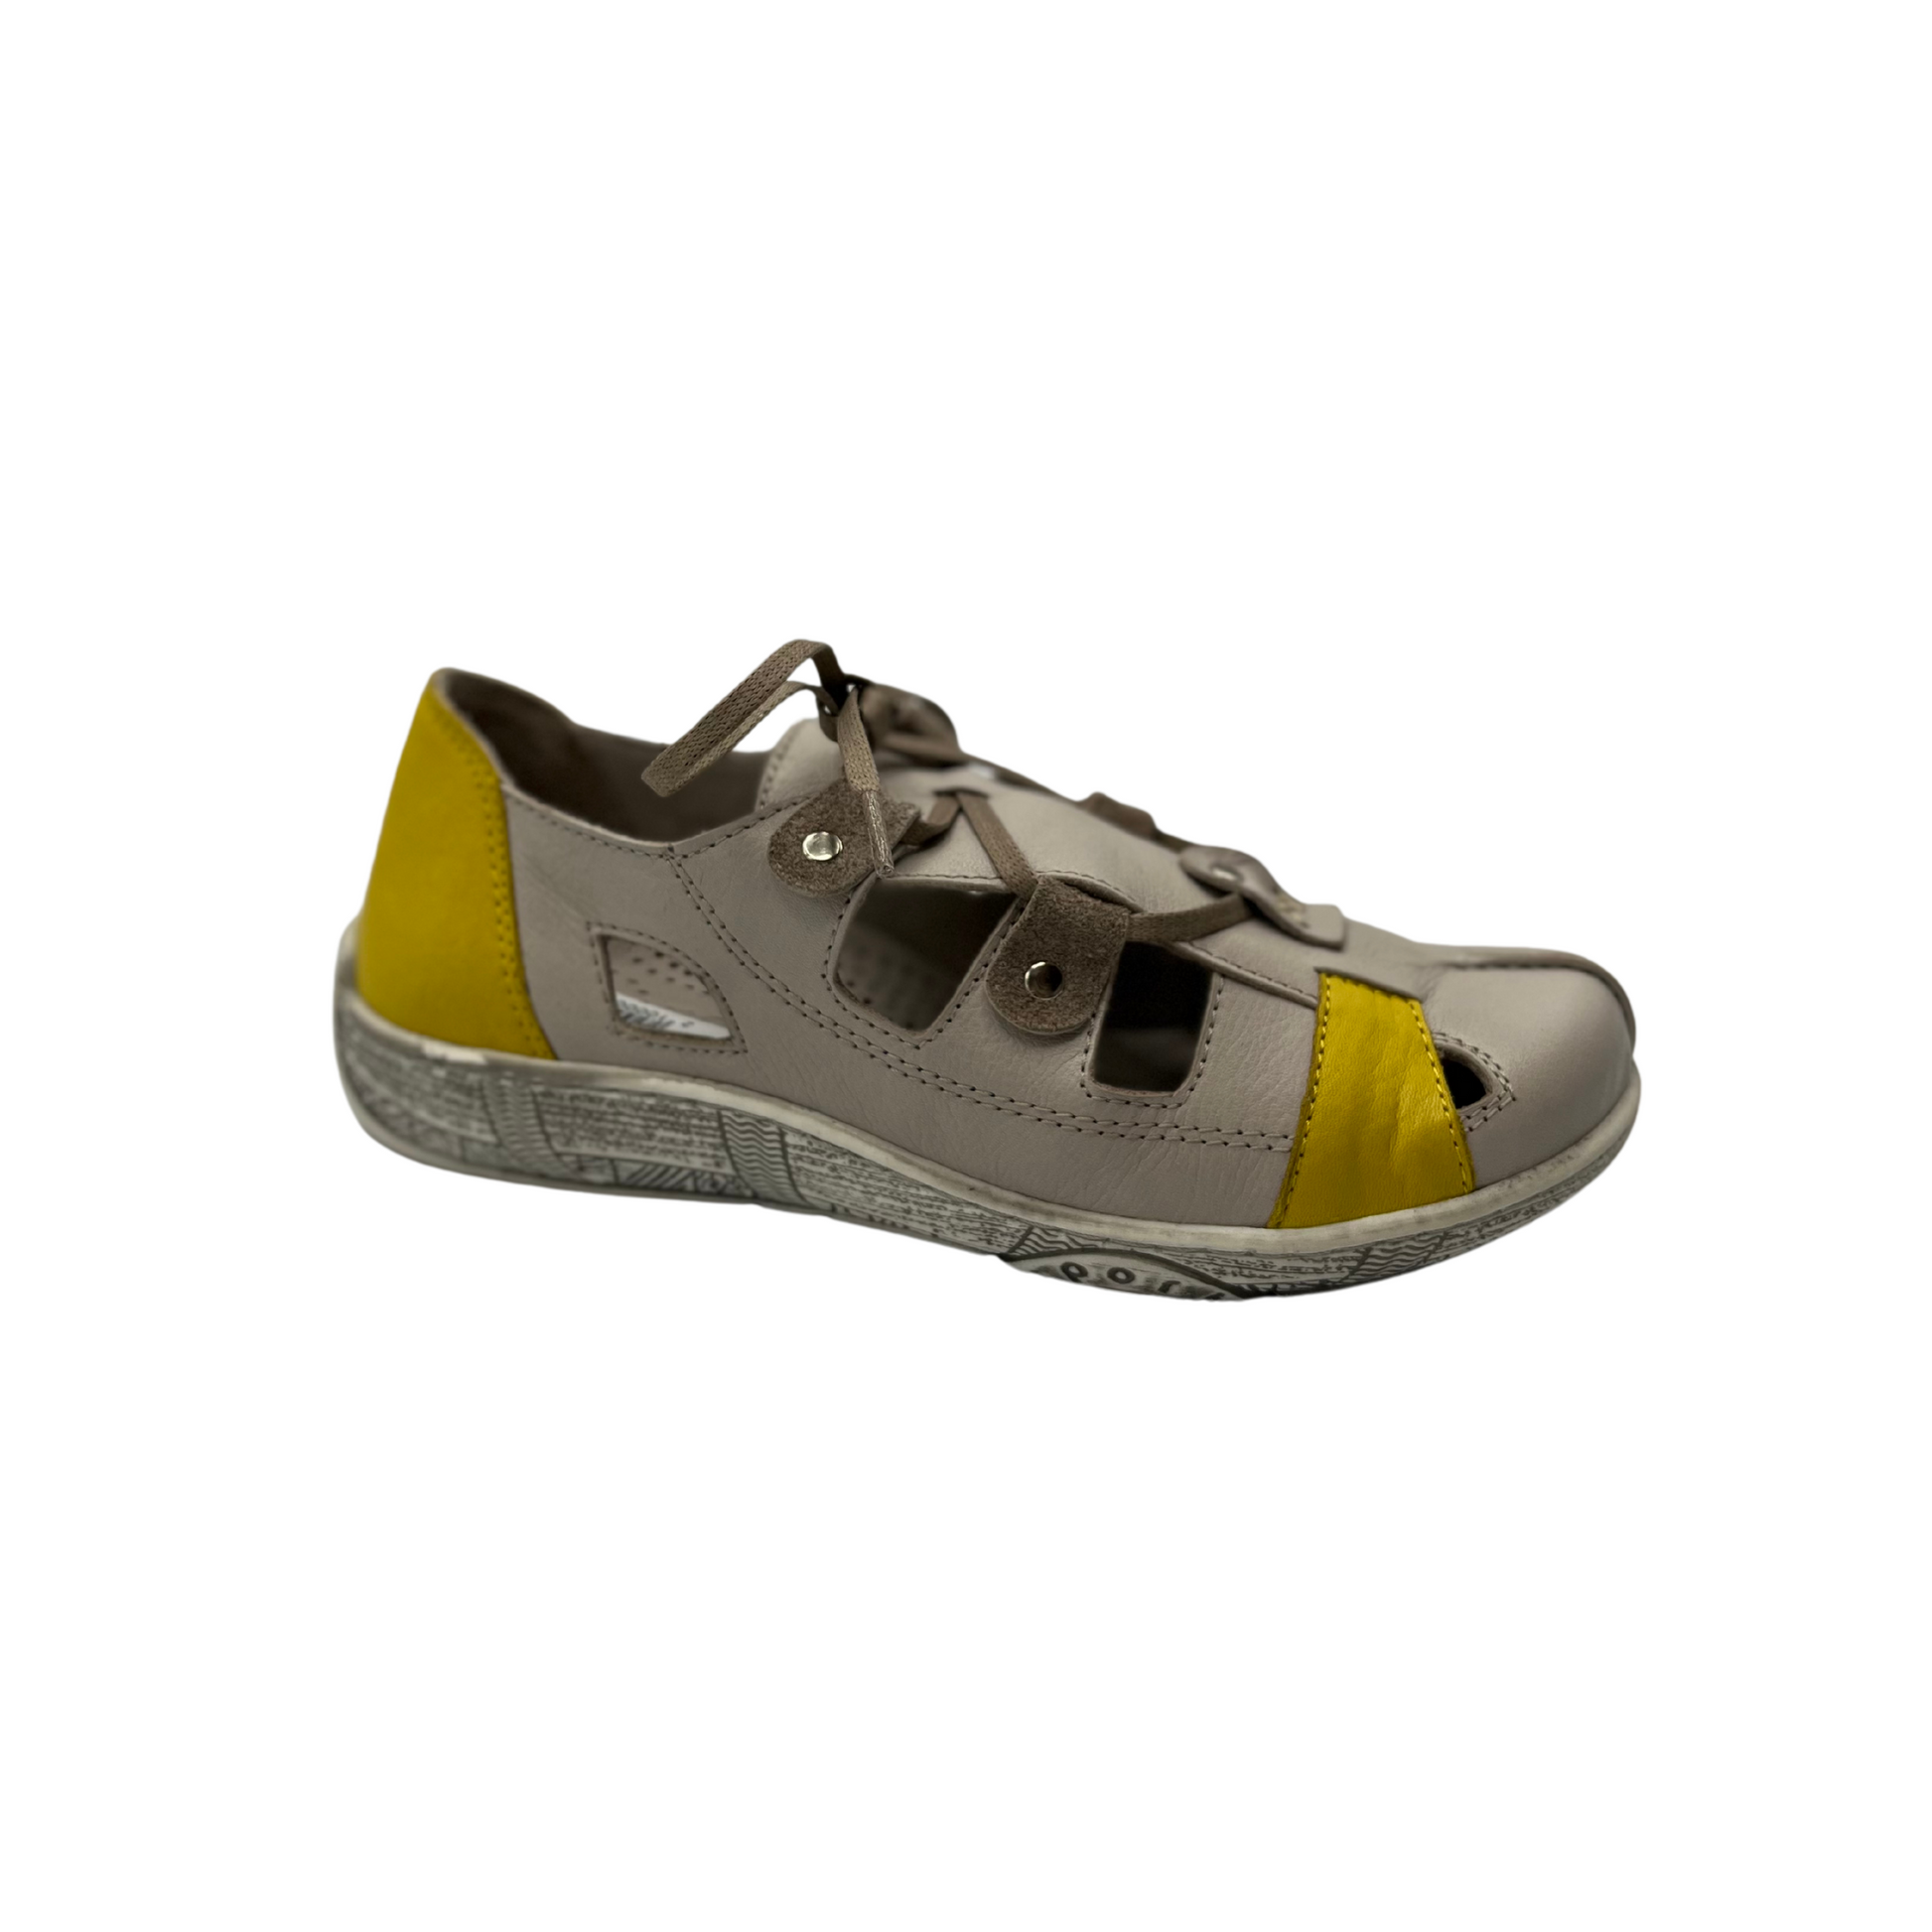 Roamers Hilda in the yellow/grey colour with removable footbed.